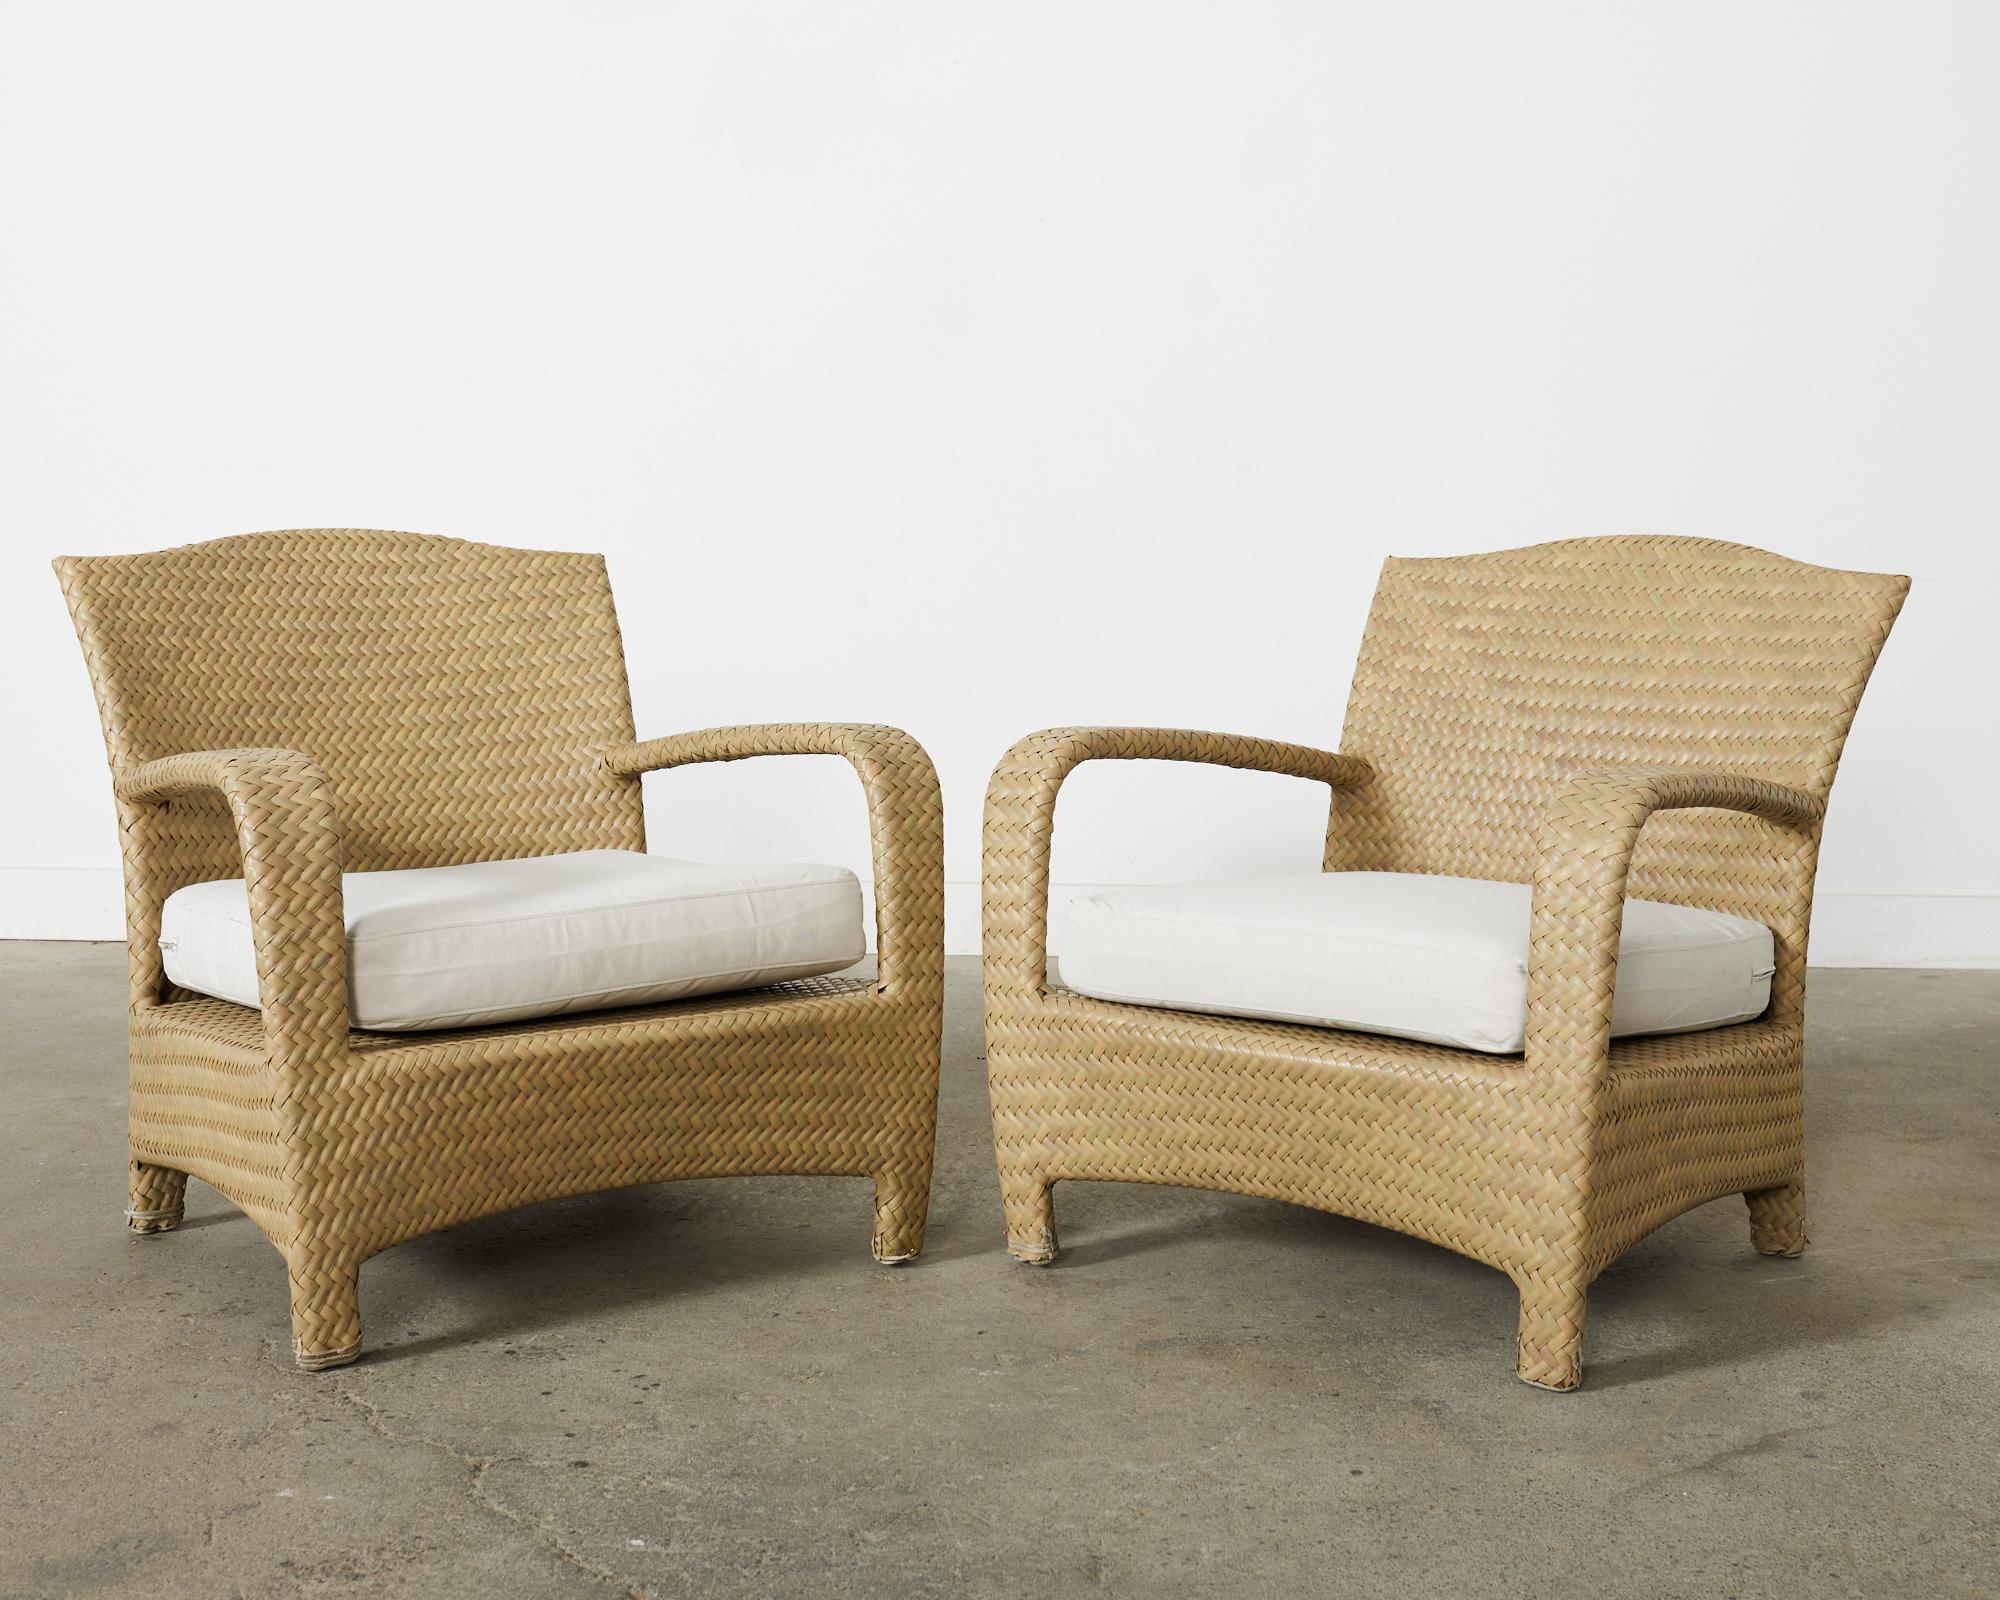 Woven Pair of Brown Jordan Wicker Havana Lounge Chairs and Ottomans